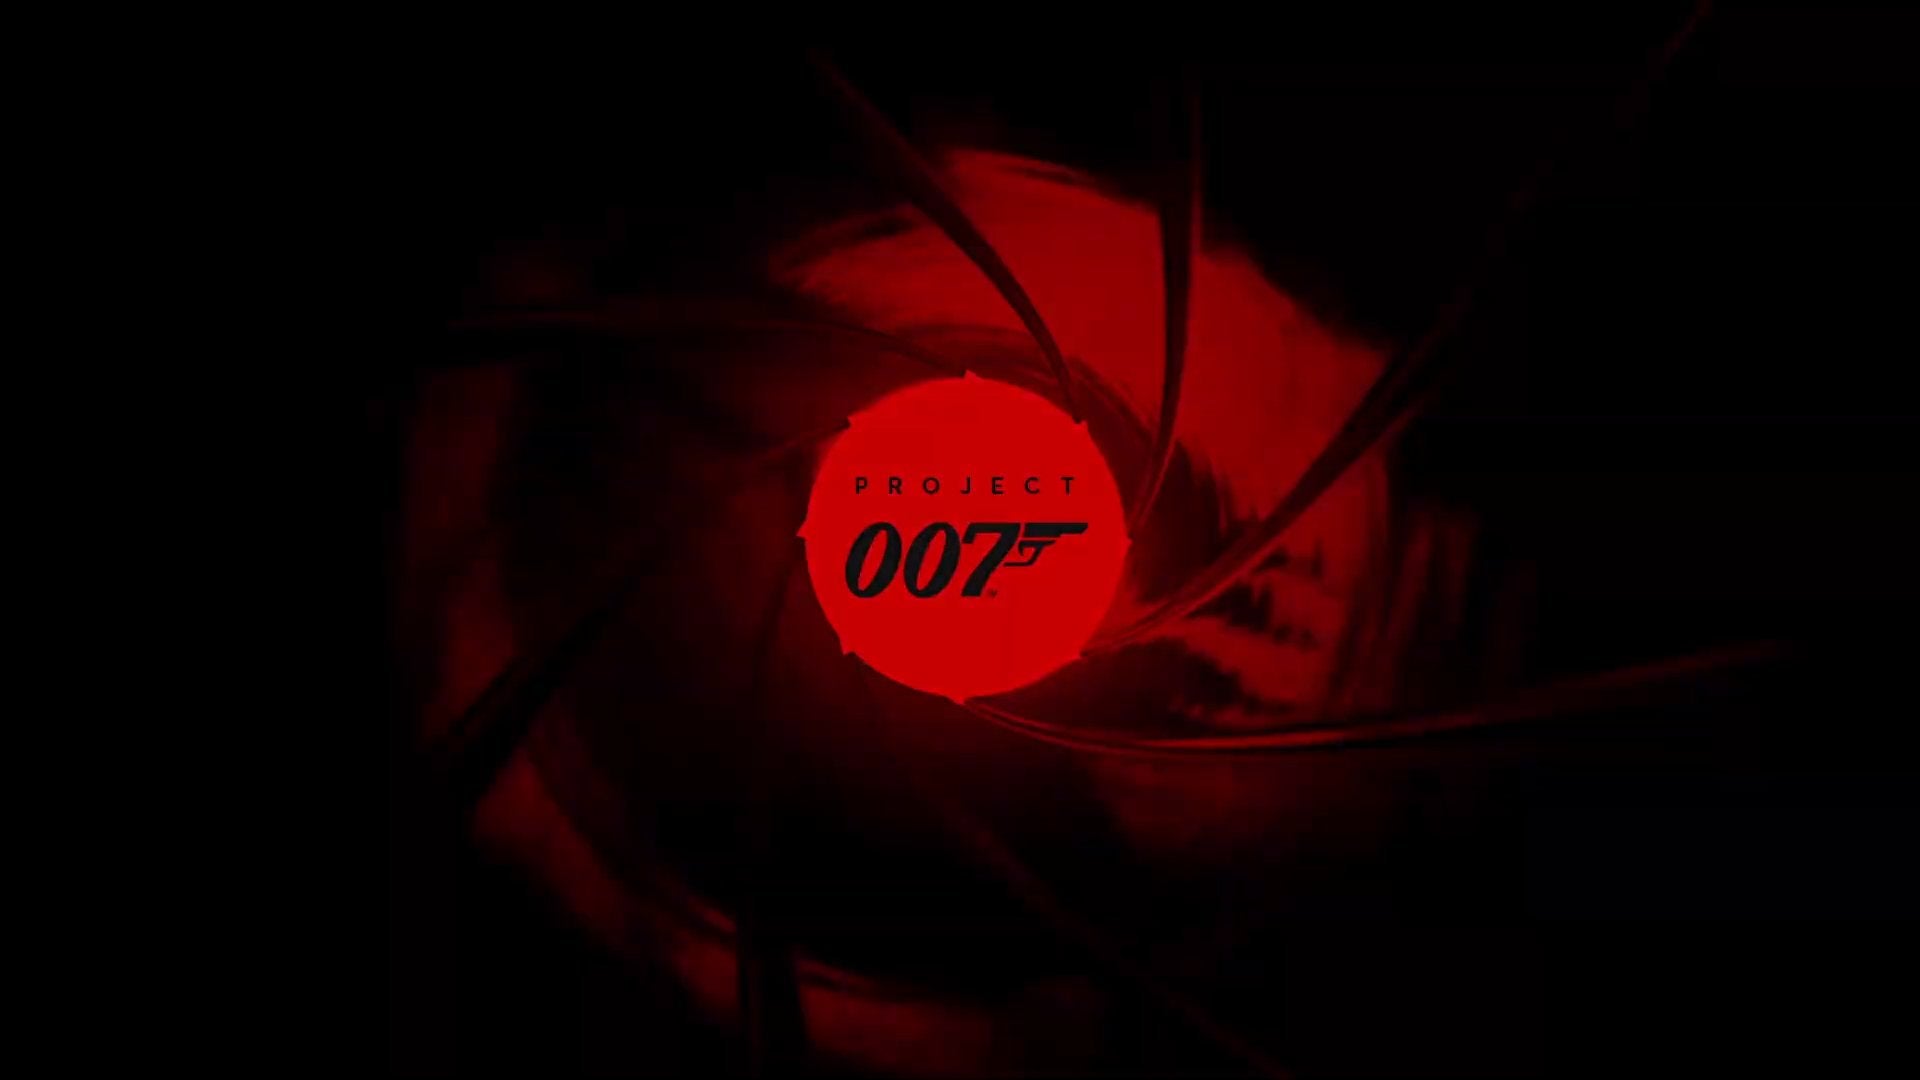 Image for Hitman developer IO Interactive teases Project 007